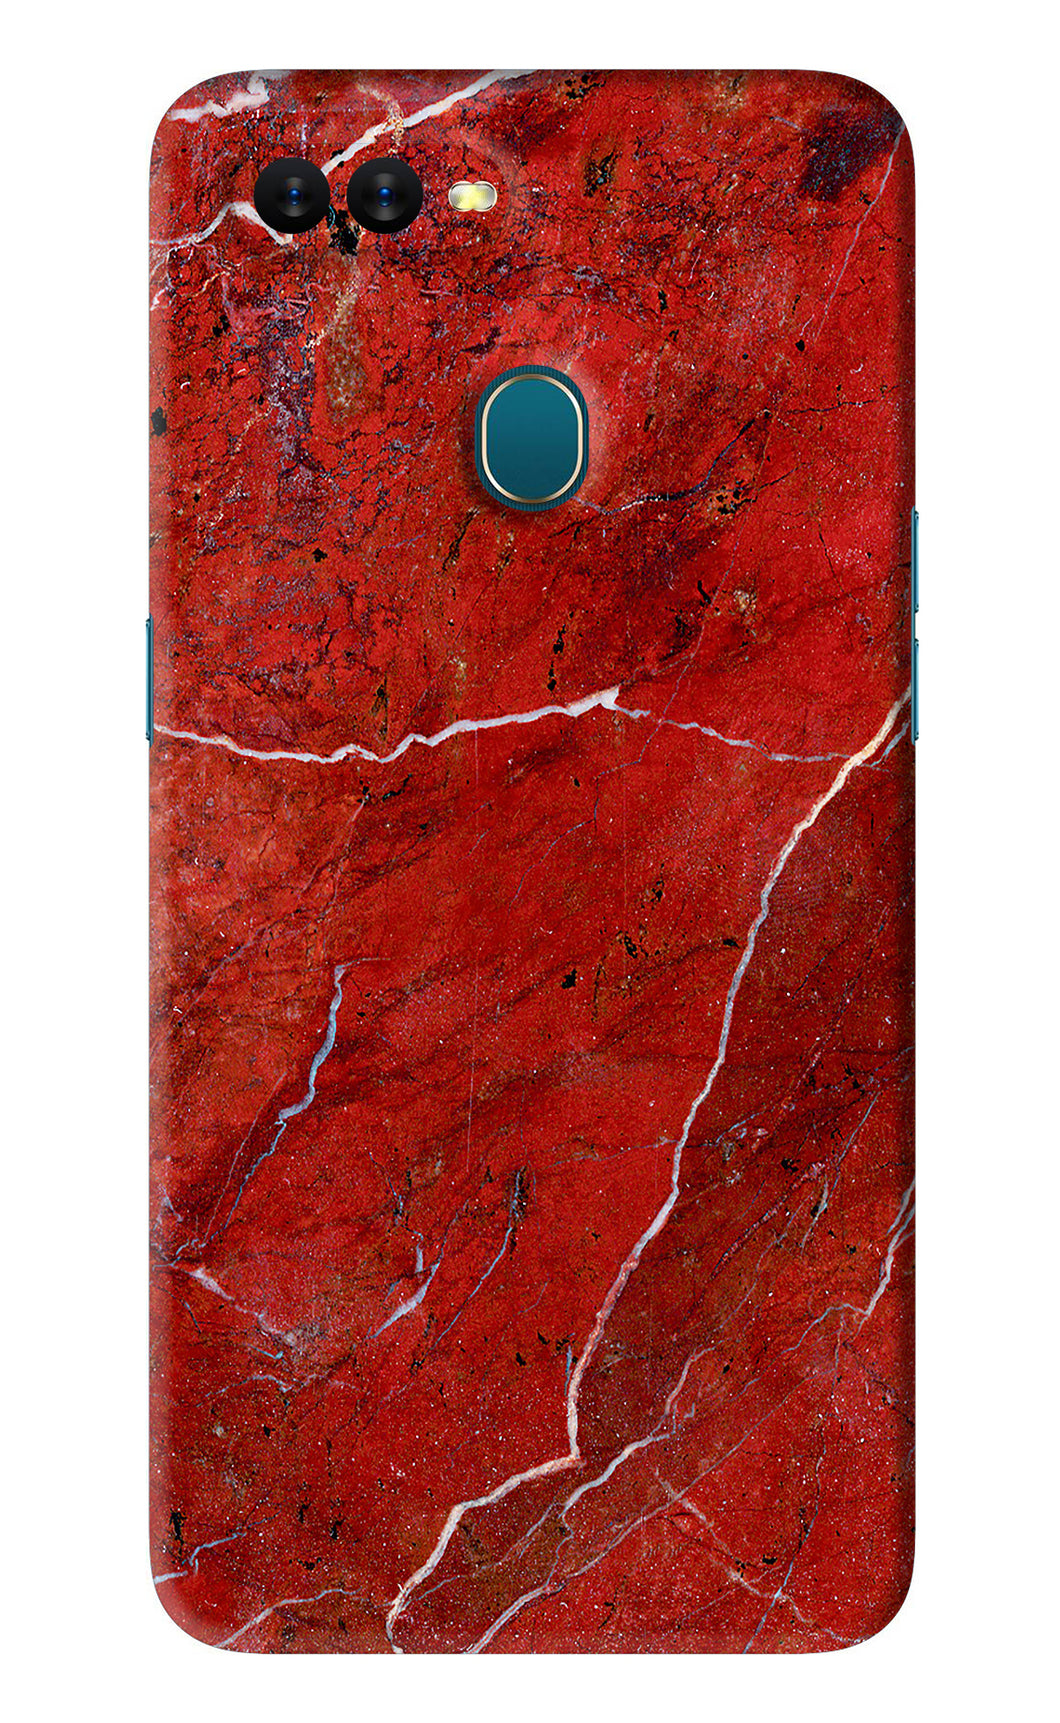 Red Marble Design Oppo A5S Back Skin Wrap